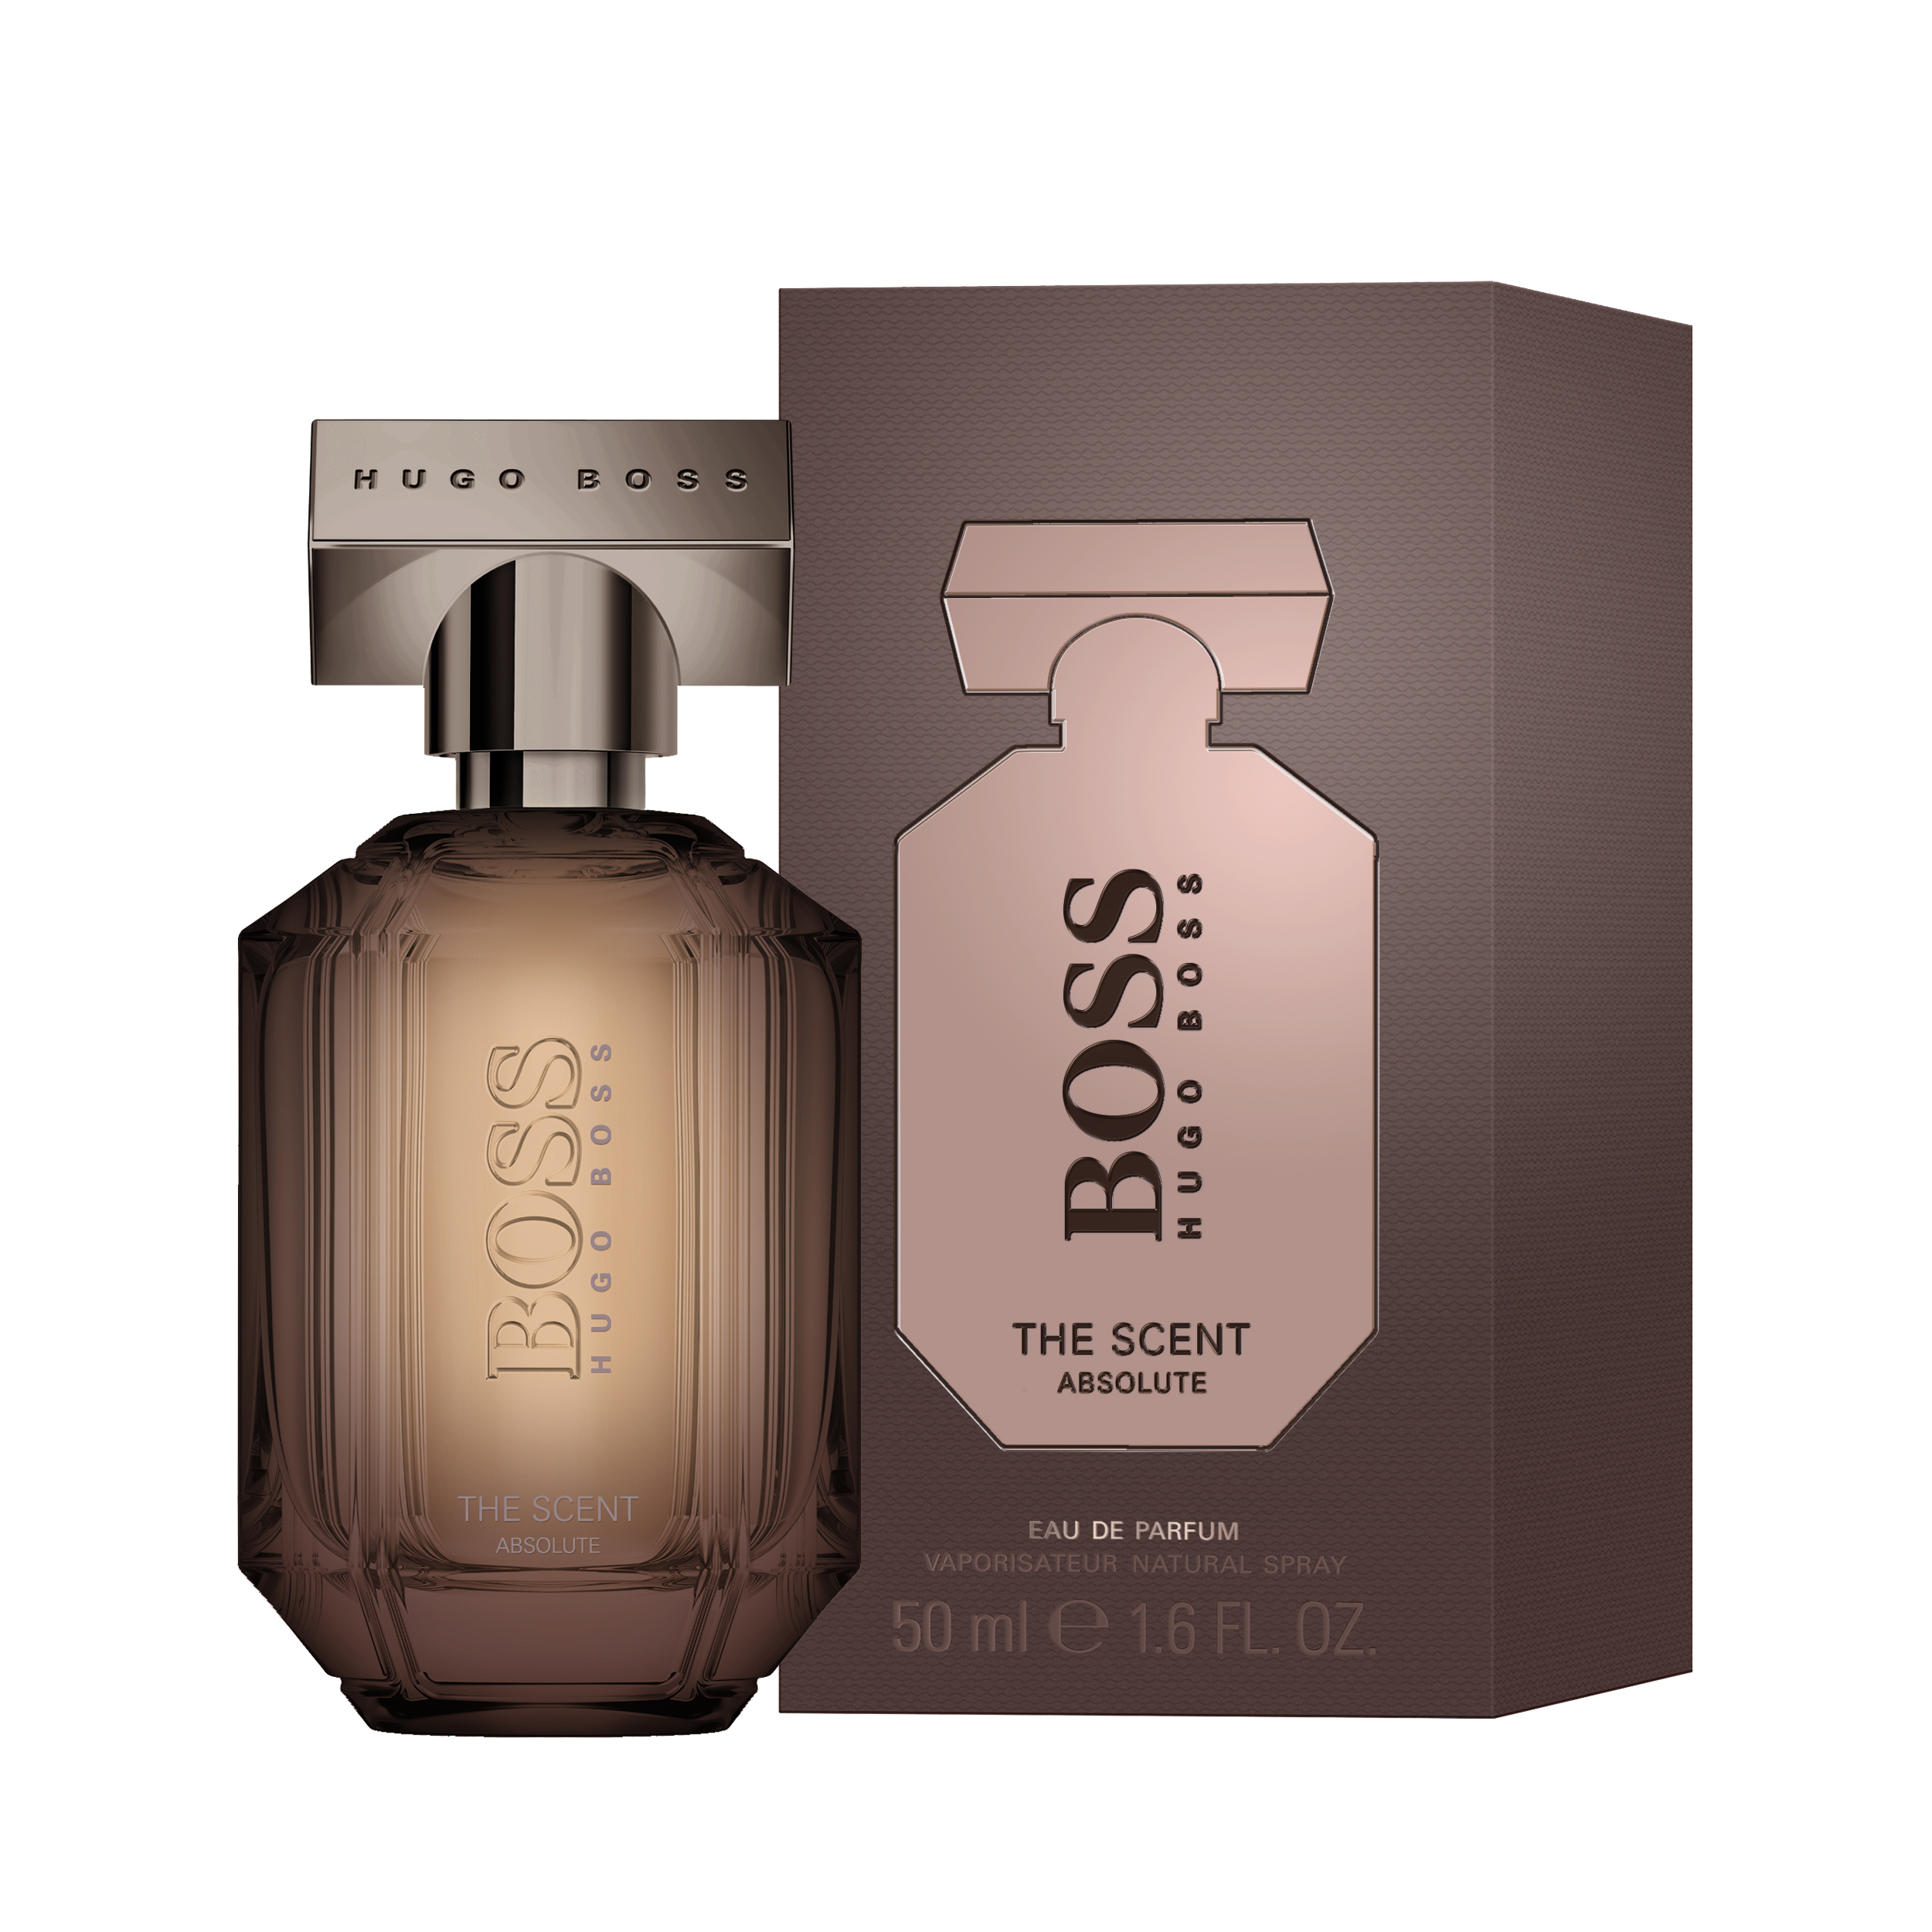 Le scent hugo boss. Hugo Boss духи женские the Scent. Boss Hugo Boss the Scent le Parfum. Hugo Boss the Scent absolute for her. Hugo Boss the Scent for her 100 ml.